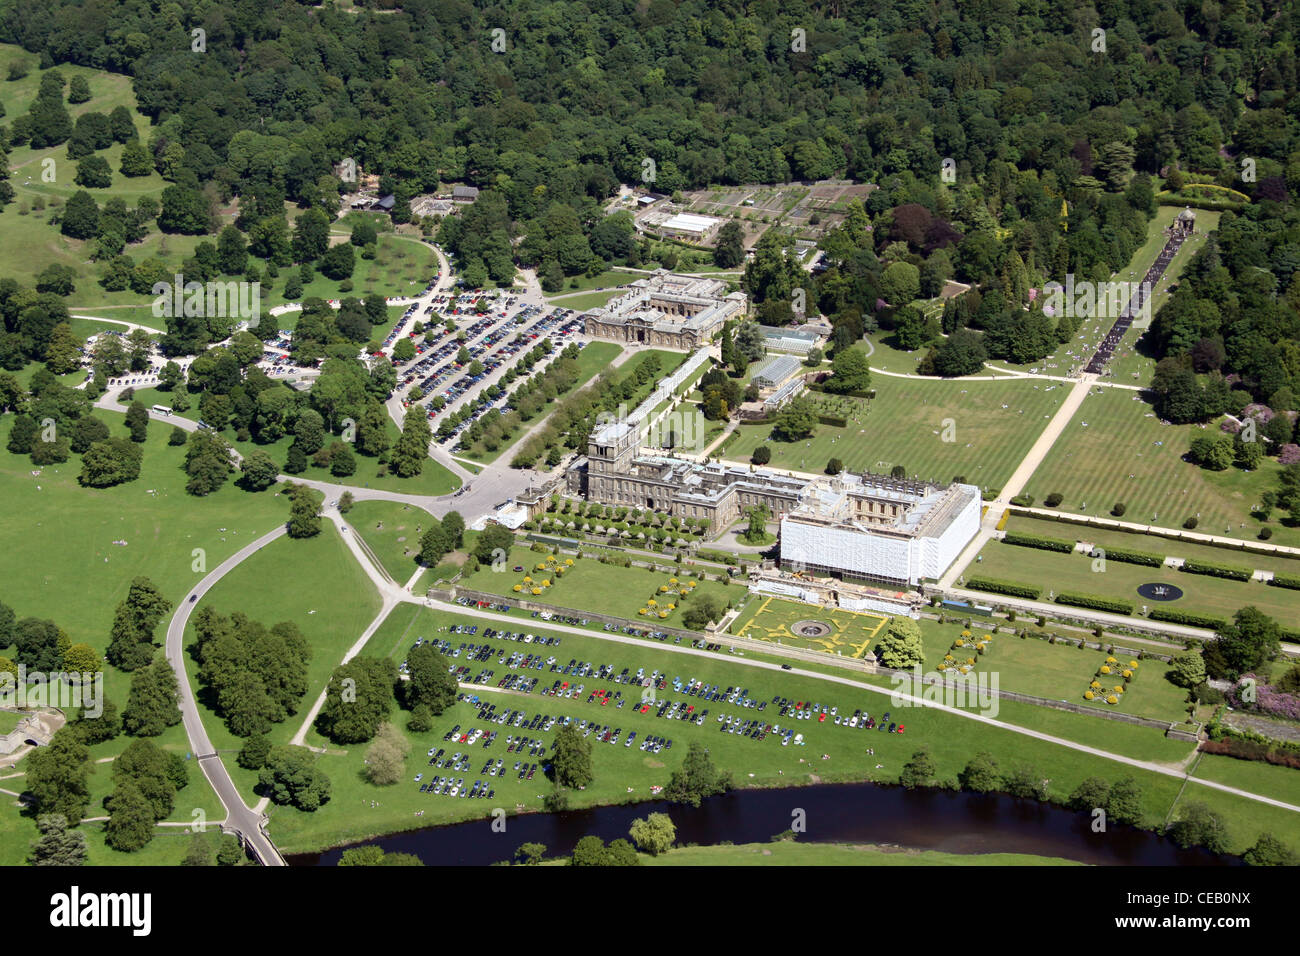 Aerial image of Chatsworth House, Derbyshire during major renovation work in 2011 Stock Photo